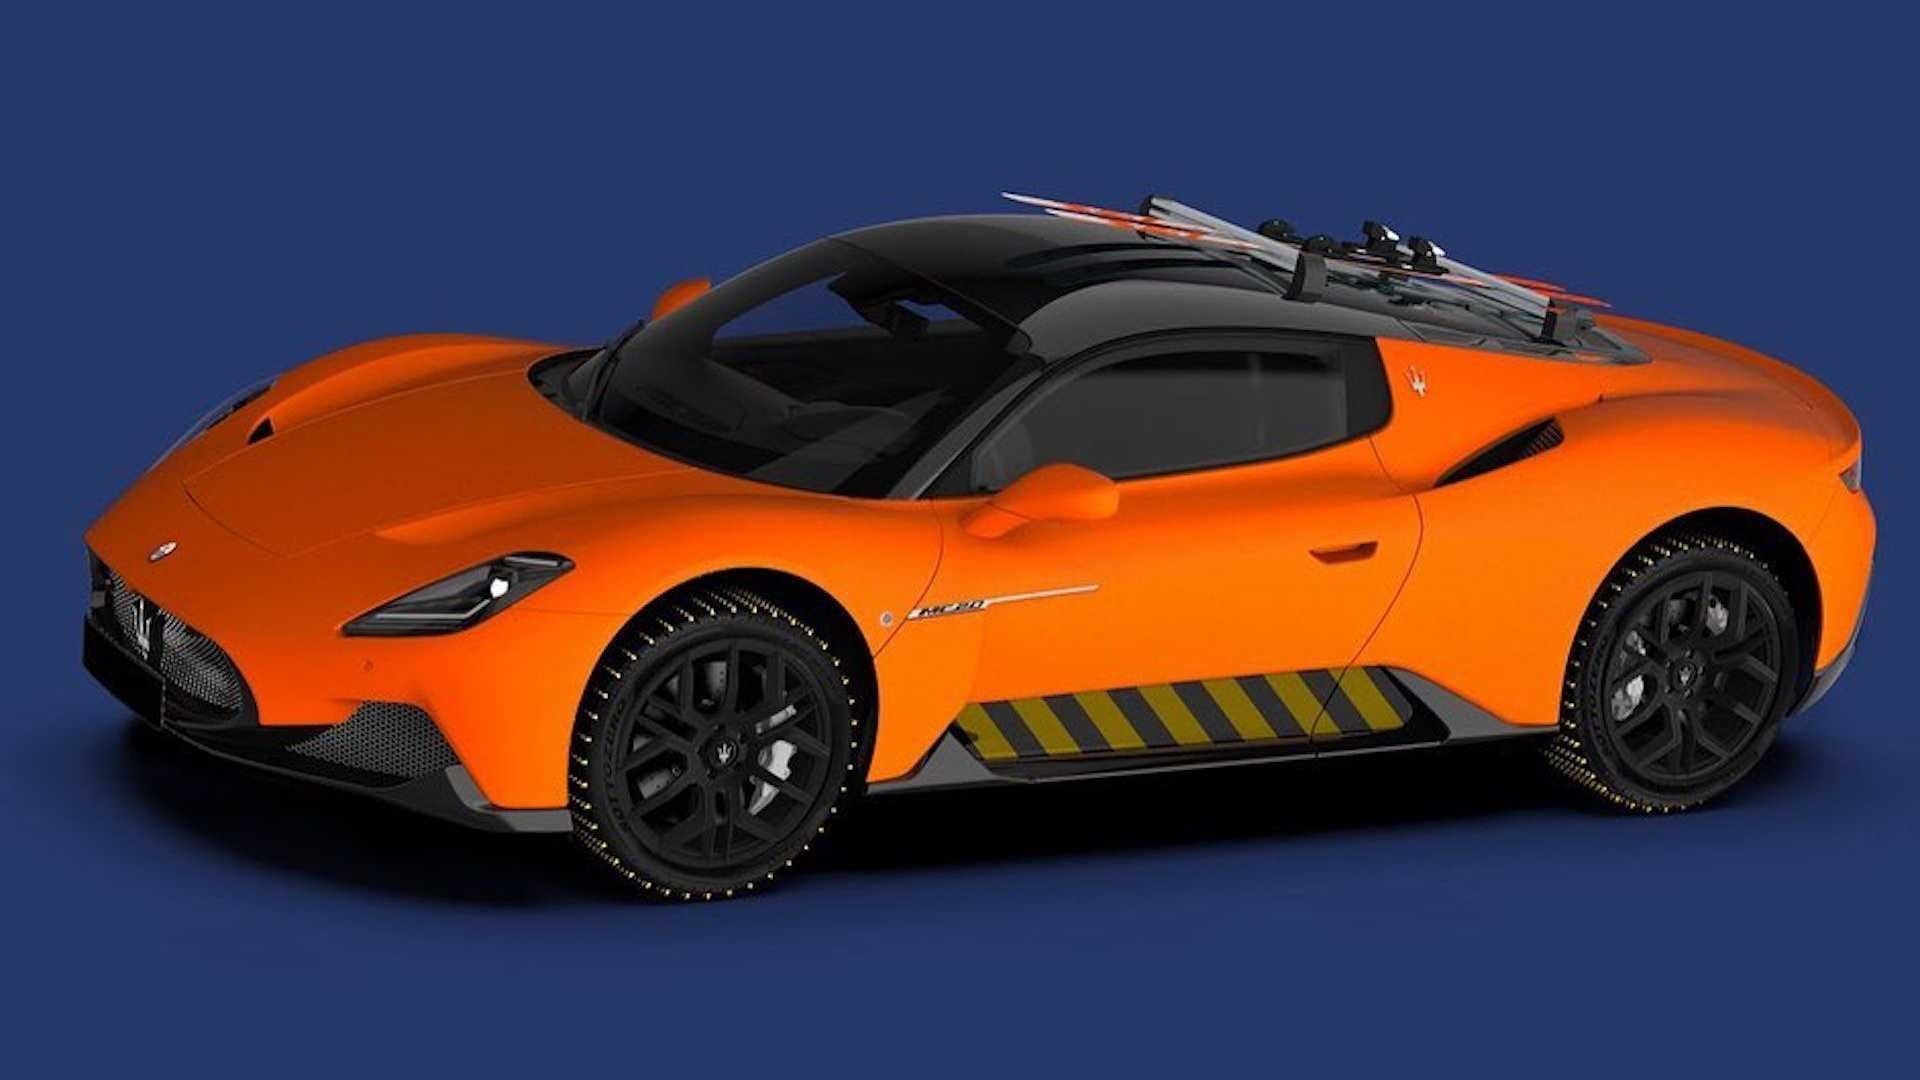 Maserati MC20 Looks Great In Ski-Ready Official Rendering